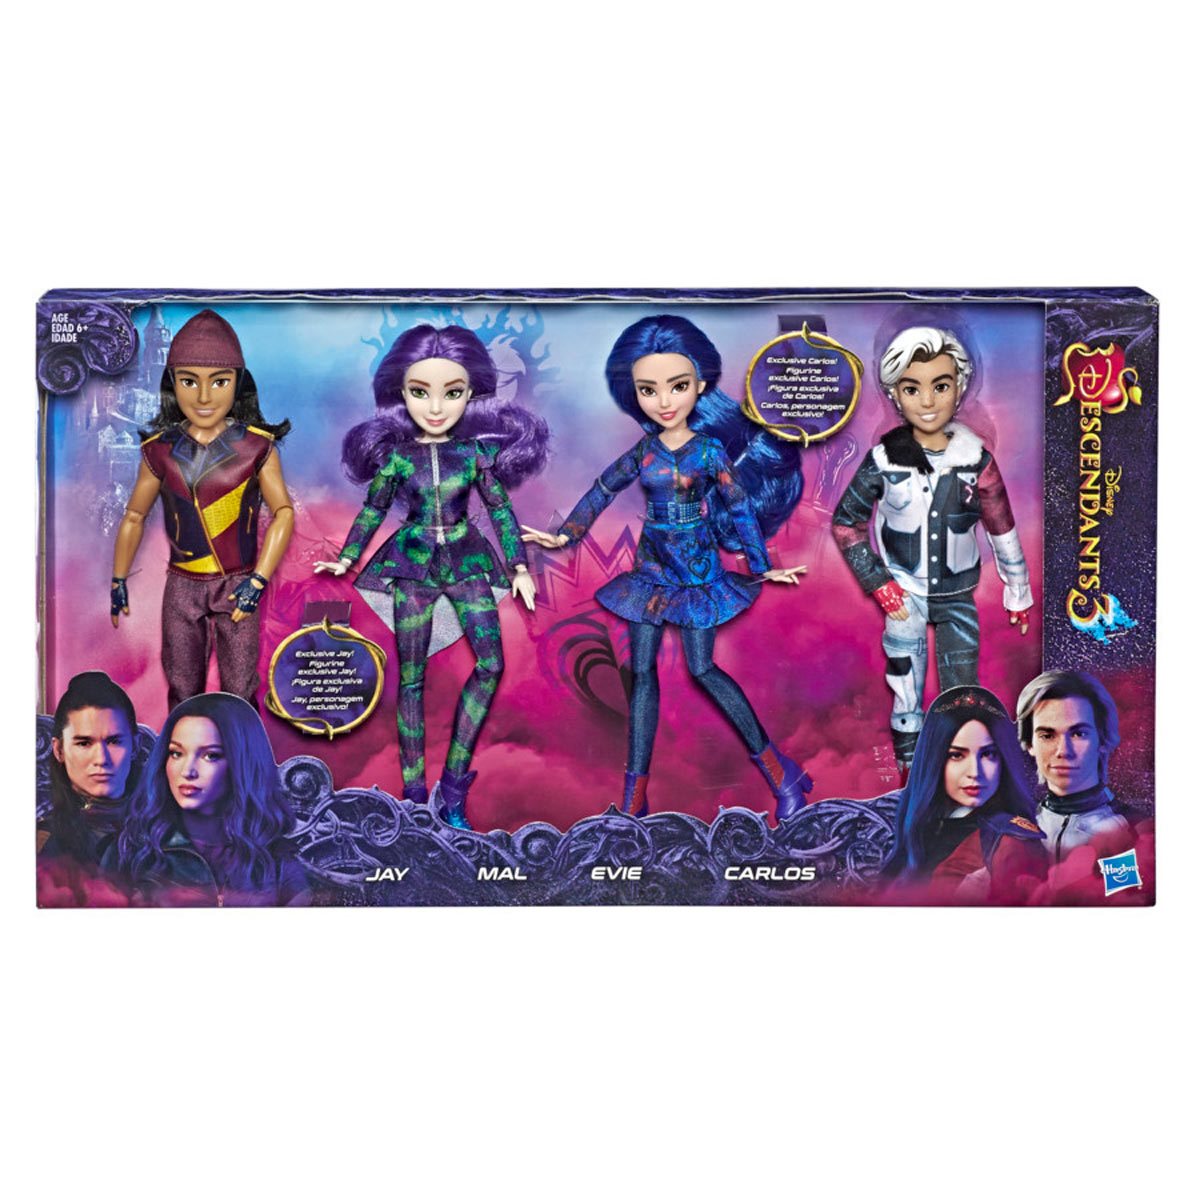  Disney Descendants 2 Mal Isle of the Lost Doll - Poseable  Figure with Stylish Outfit and Matching Shoes : Hasbro: Toys & Games